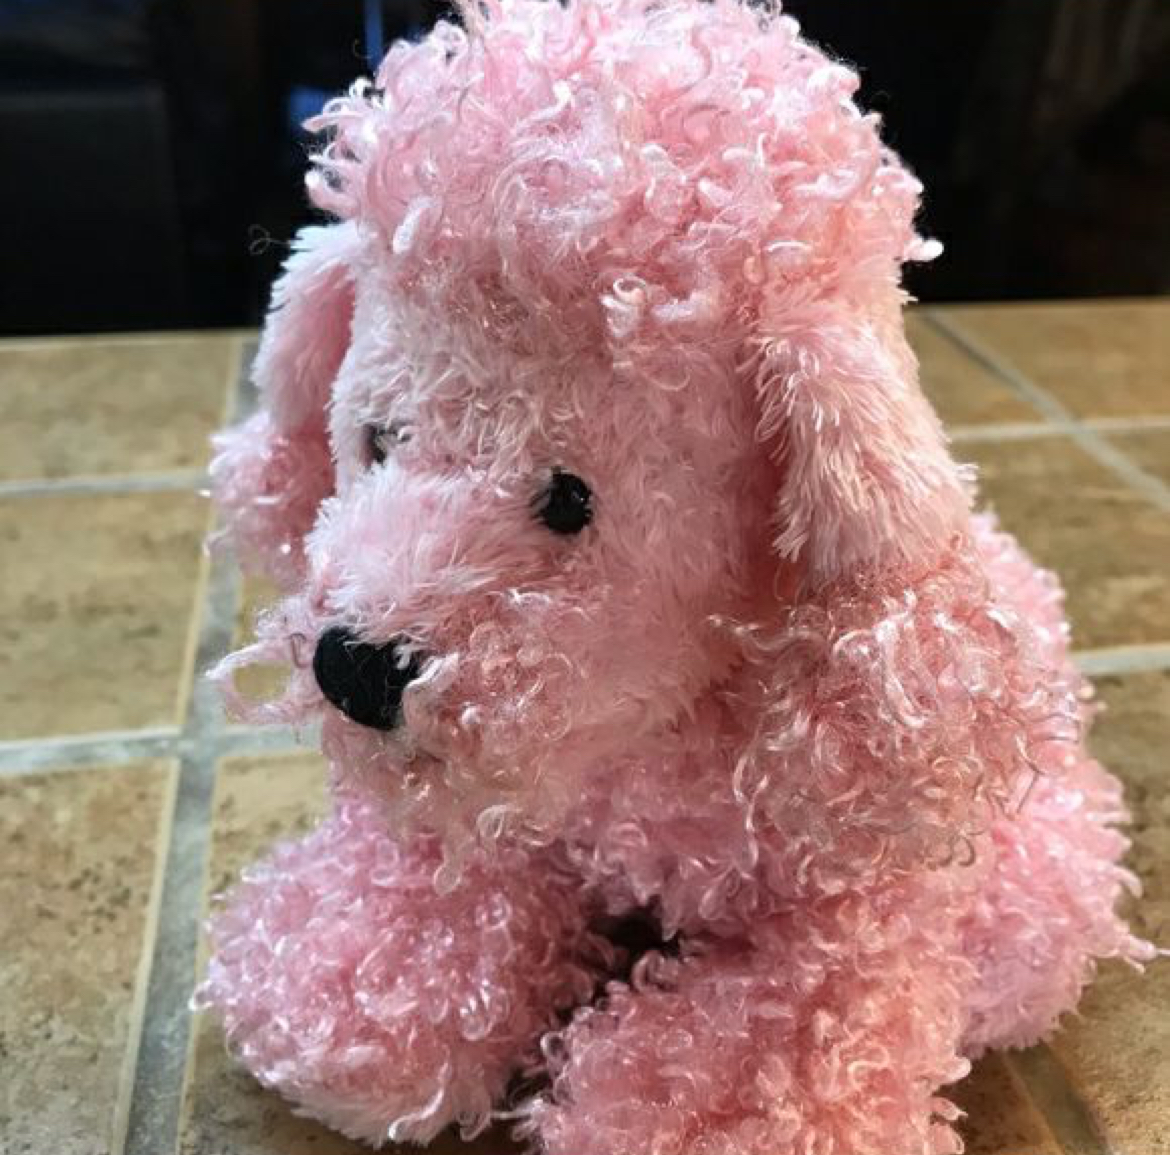 While I have yet to find the original stuffed poodle, I still have the copy my mother bought me. 